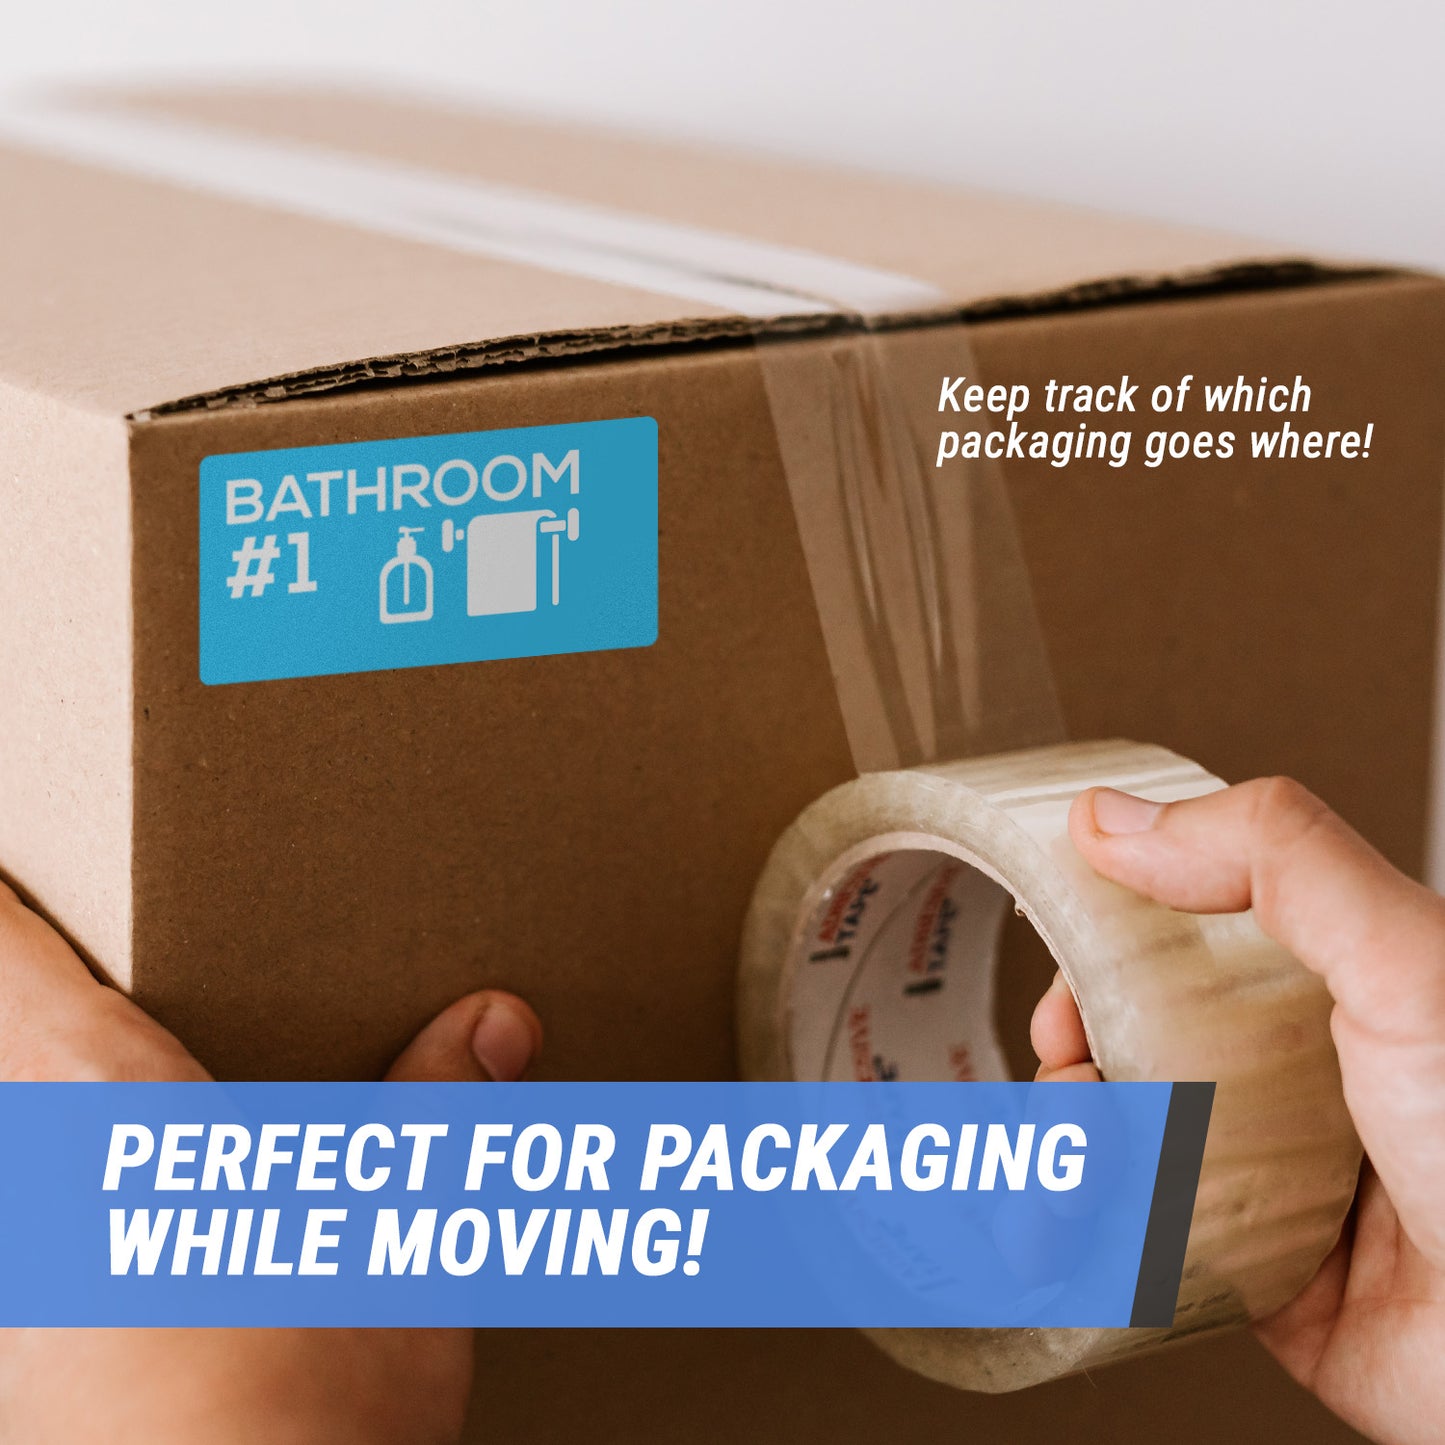 4 x 2 inch | Moving & Packing: Bathroom #1 Stickers